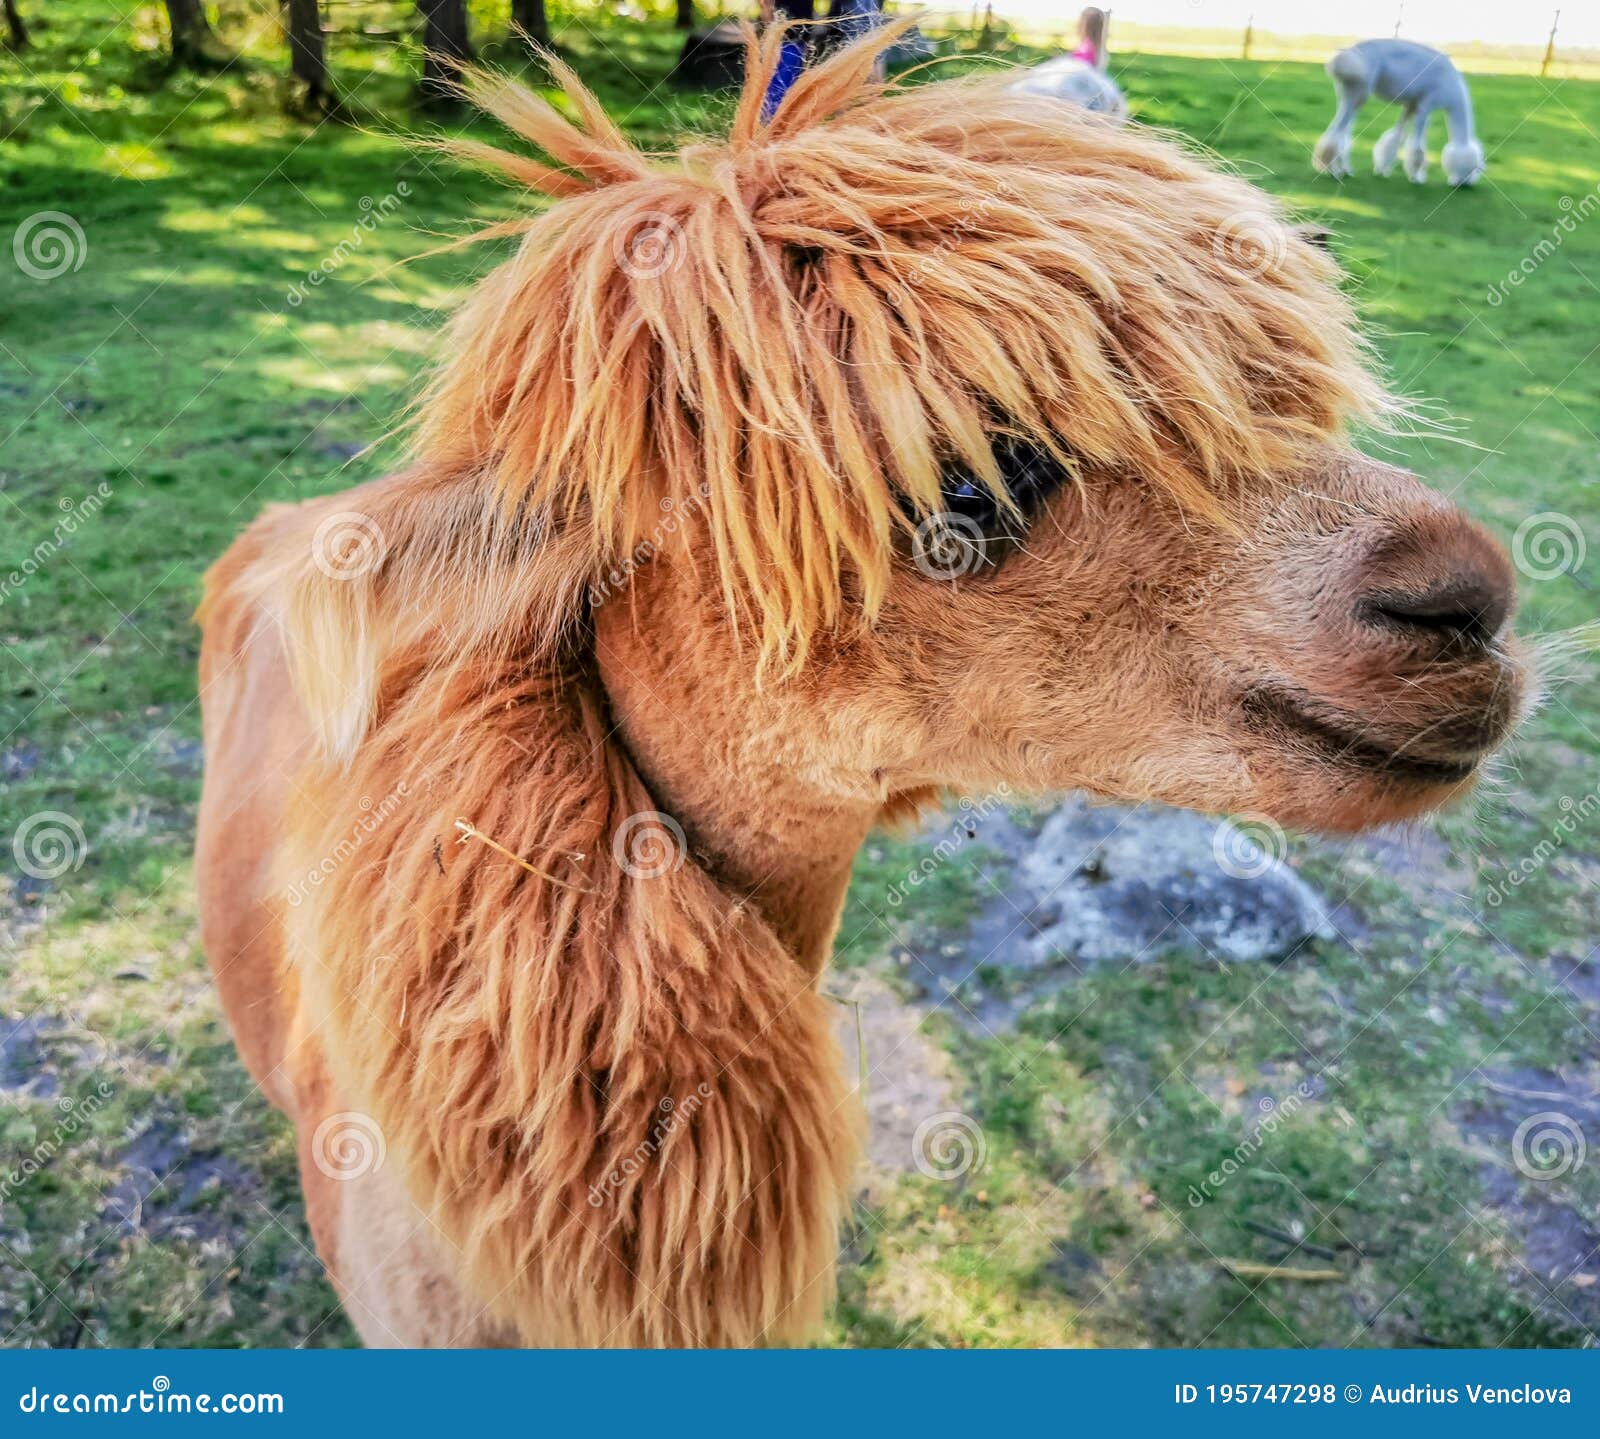 An Alpaca with a Funny Haircut, a Relative of the Llama Looking To Camera  Stock Photo - Image of horizontal, dawn: 195747298